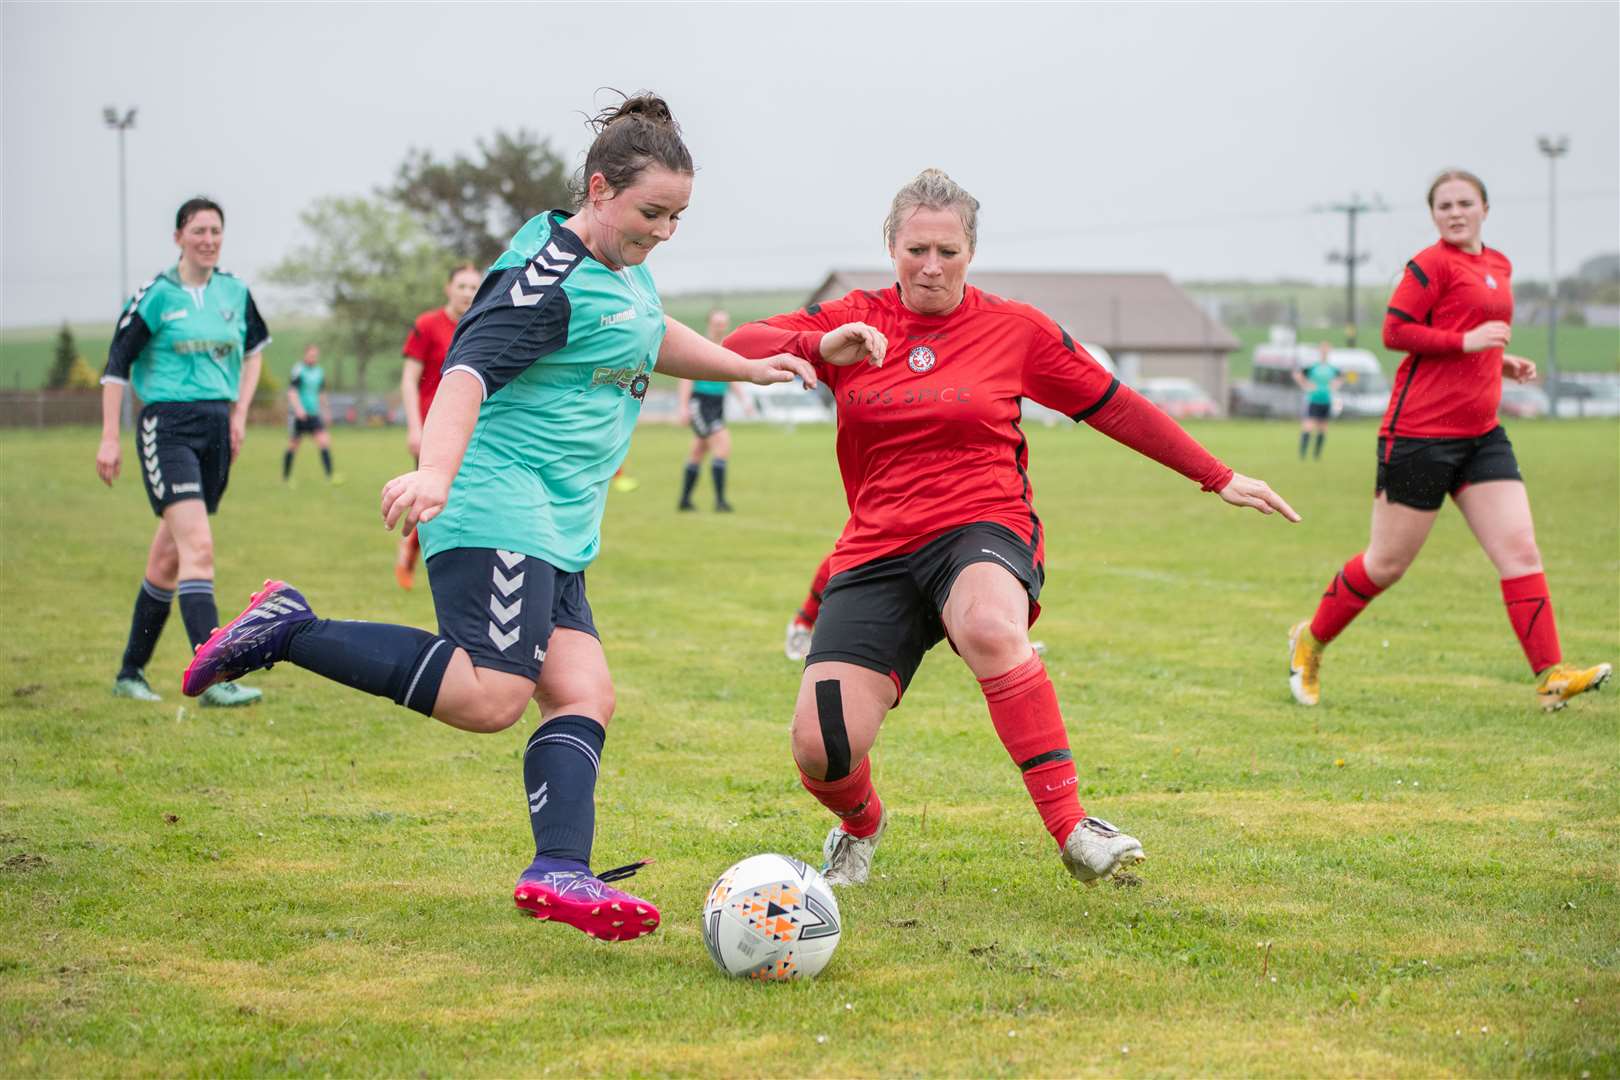 Brora's Mary Stewart makes a challenge on Buckie's Alena Gardiner in Highlands and Islands League action earlier this season. Picture: Daniel Forsyth